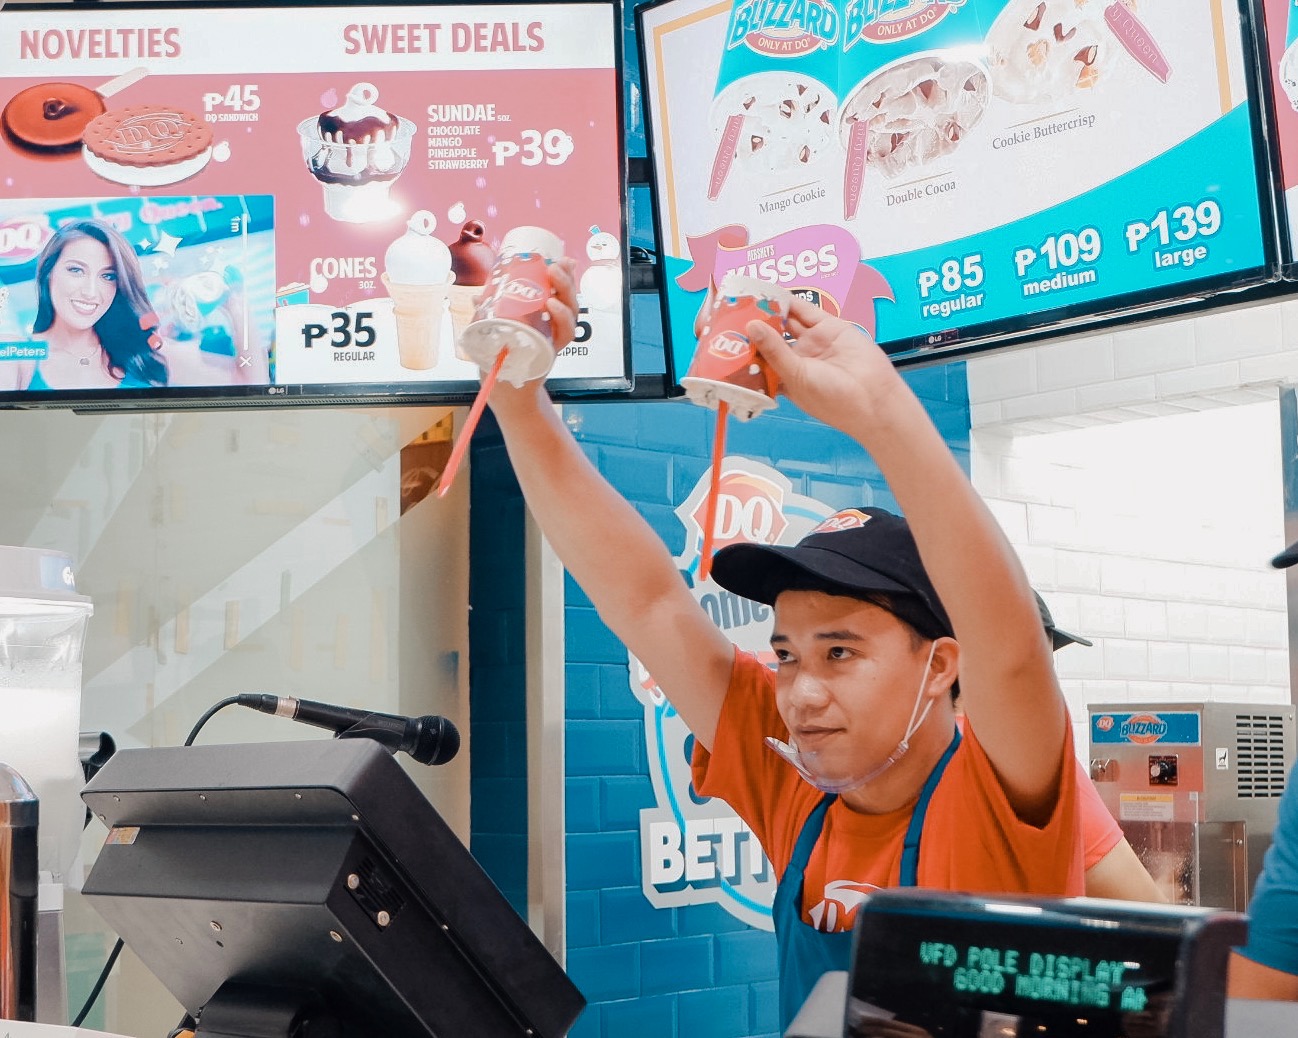 Dairy Queen Ice Cream: Turning the Cebuanos' World Upside Down